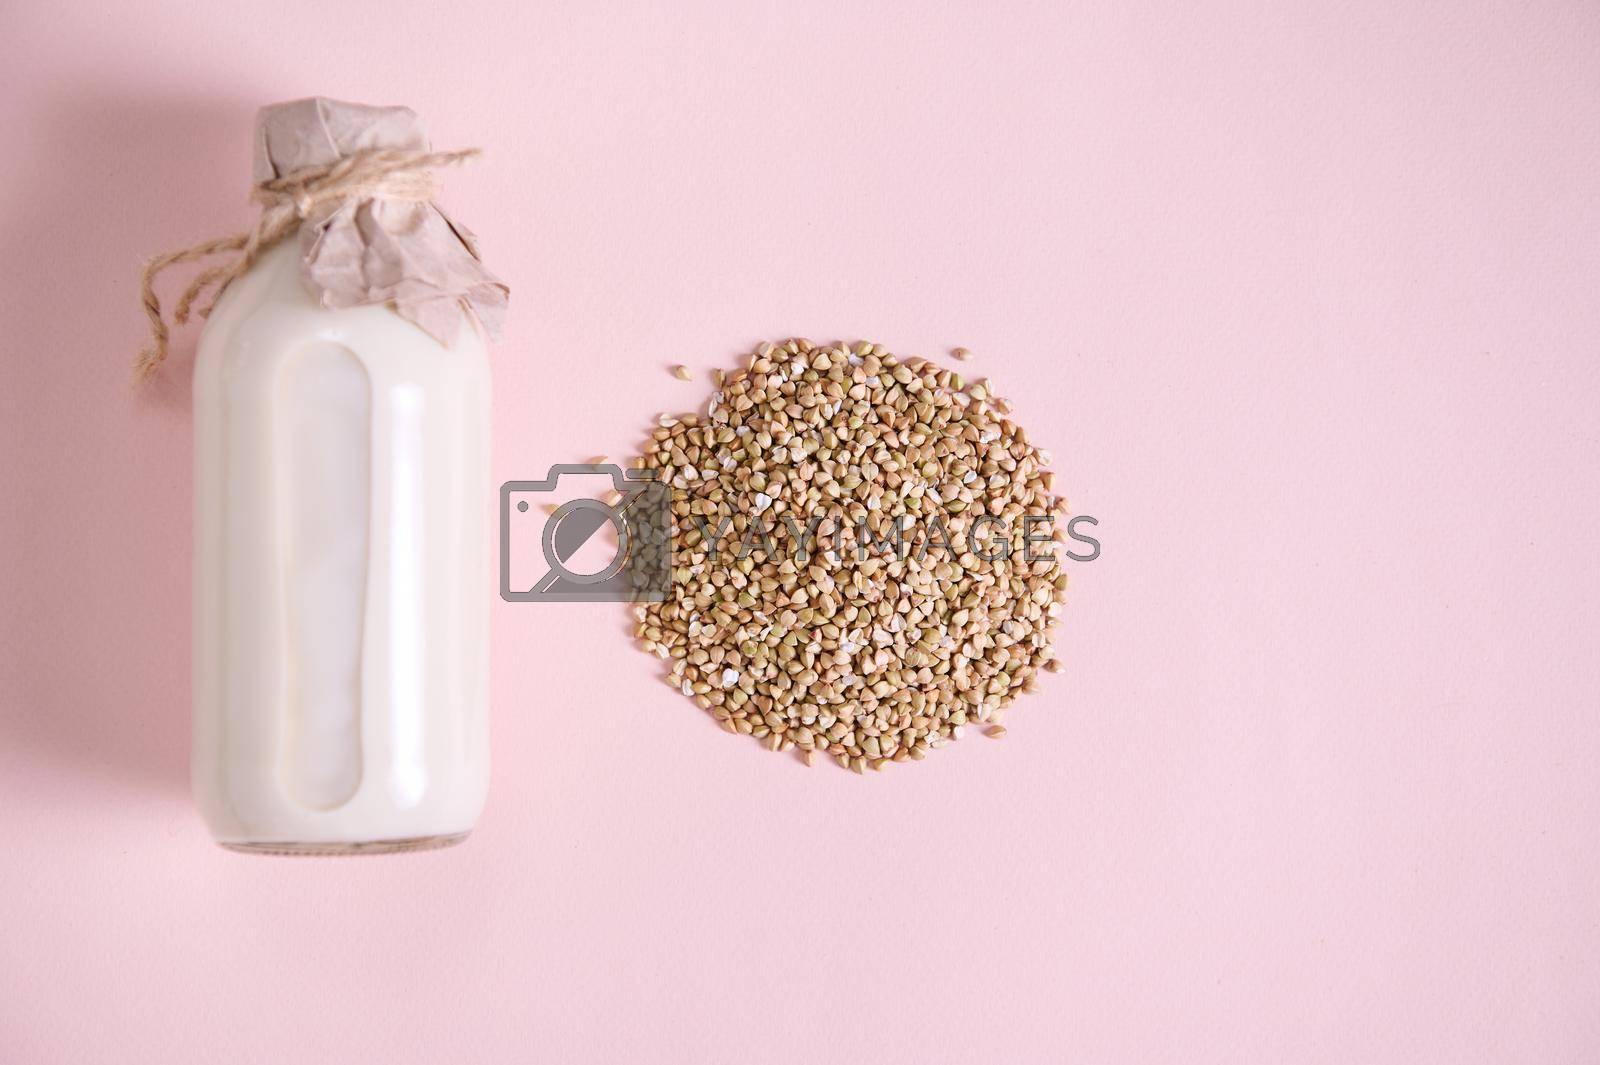 Royalty free image of Flat lay of a vegan green buckwheat milk in bottle, plant based milk replacer and grains of buckwheat on pink background by artgf